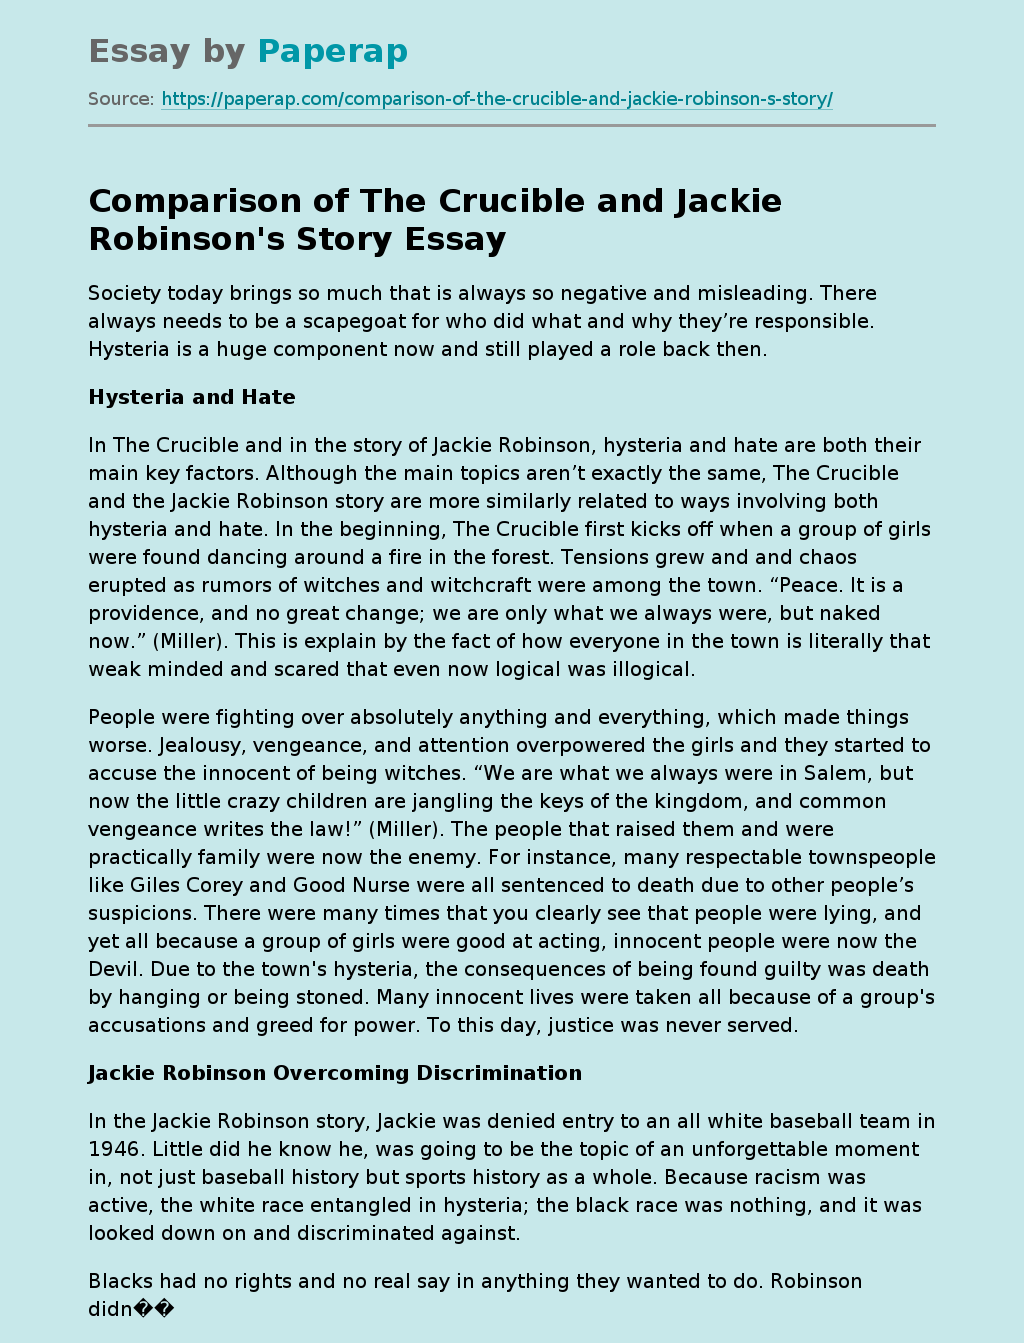 Comparison of The Crucible and Jackie Robinson's Story